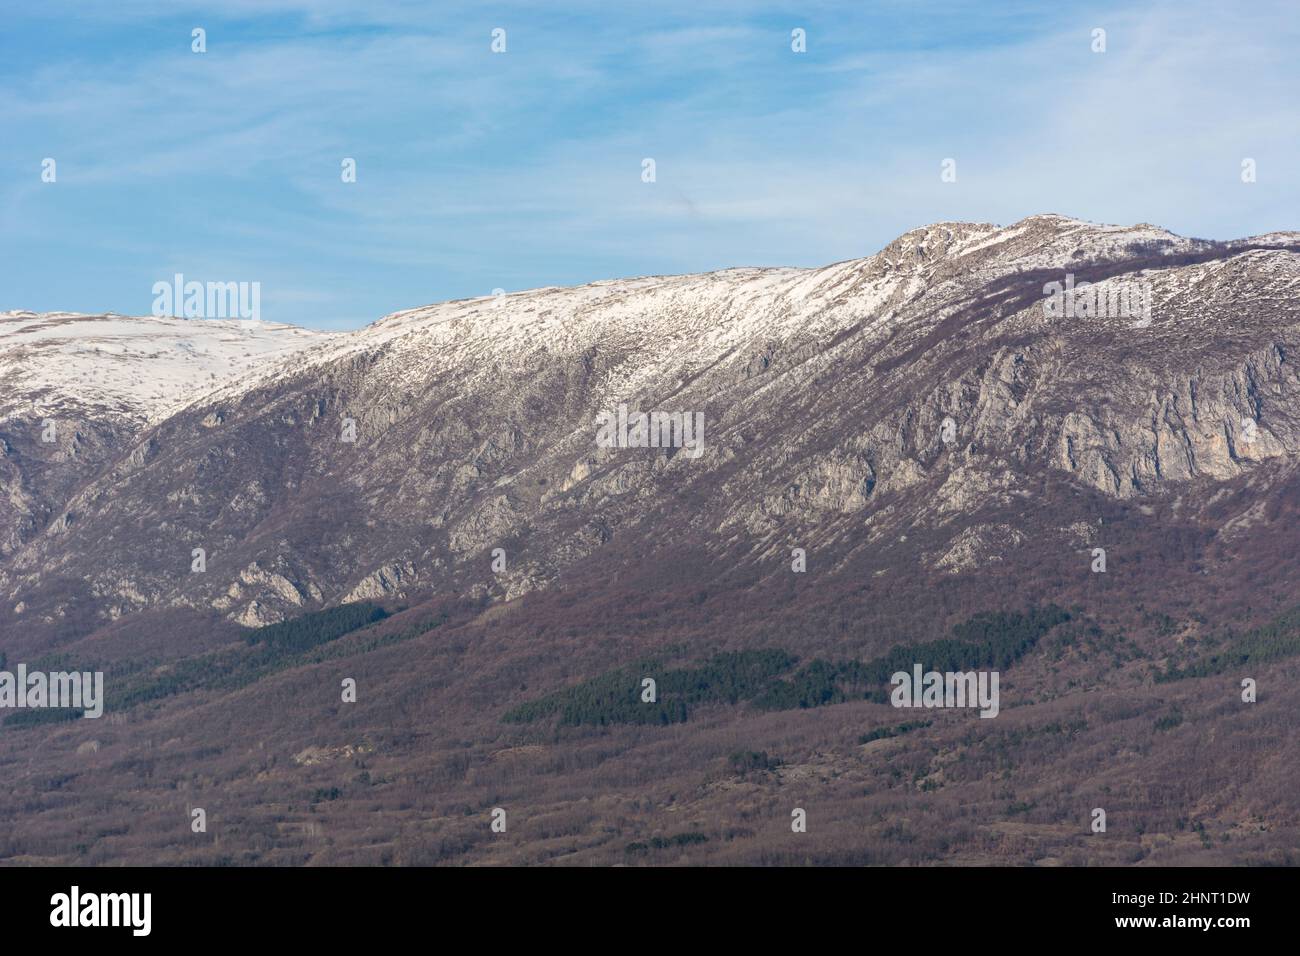 Landscape view of Suva Planina in Serbia on a winter day. The top of mountain is covered with snow Stock Photo